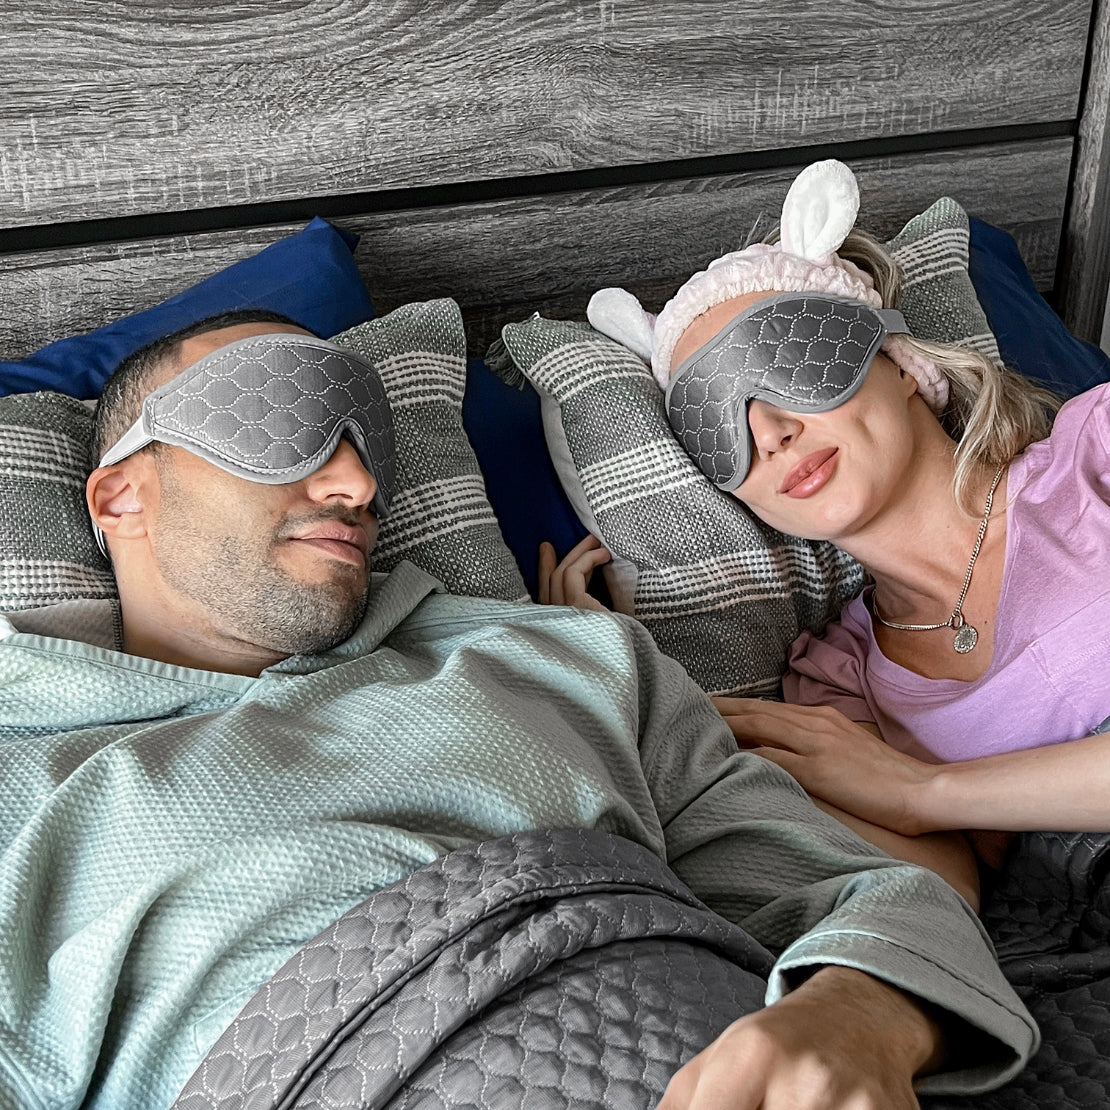 Two individuals lying side by side on a bed, each wearing unique sleeping masks. The man on the left wears a gray patterned mask, while the woman on the right sports a mask with bunny ears. They are surrounded by comfy pillows and blankets, emphasizing a peaceful sleep environment